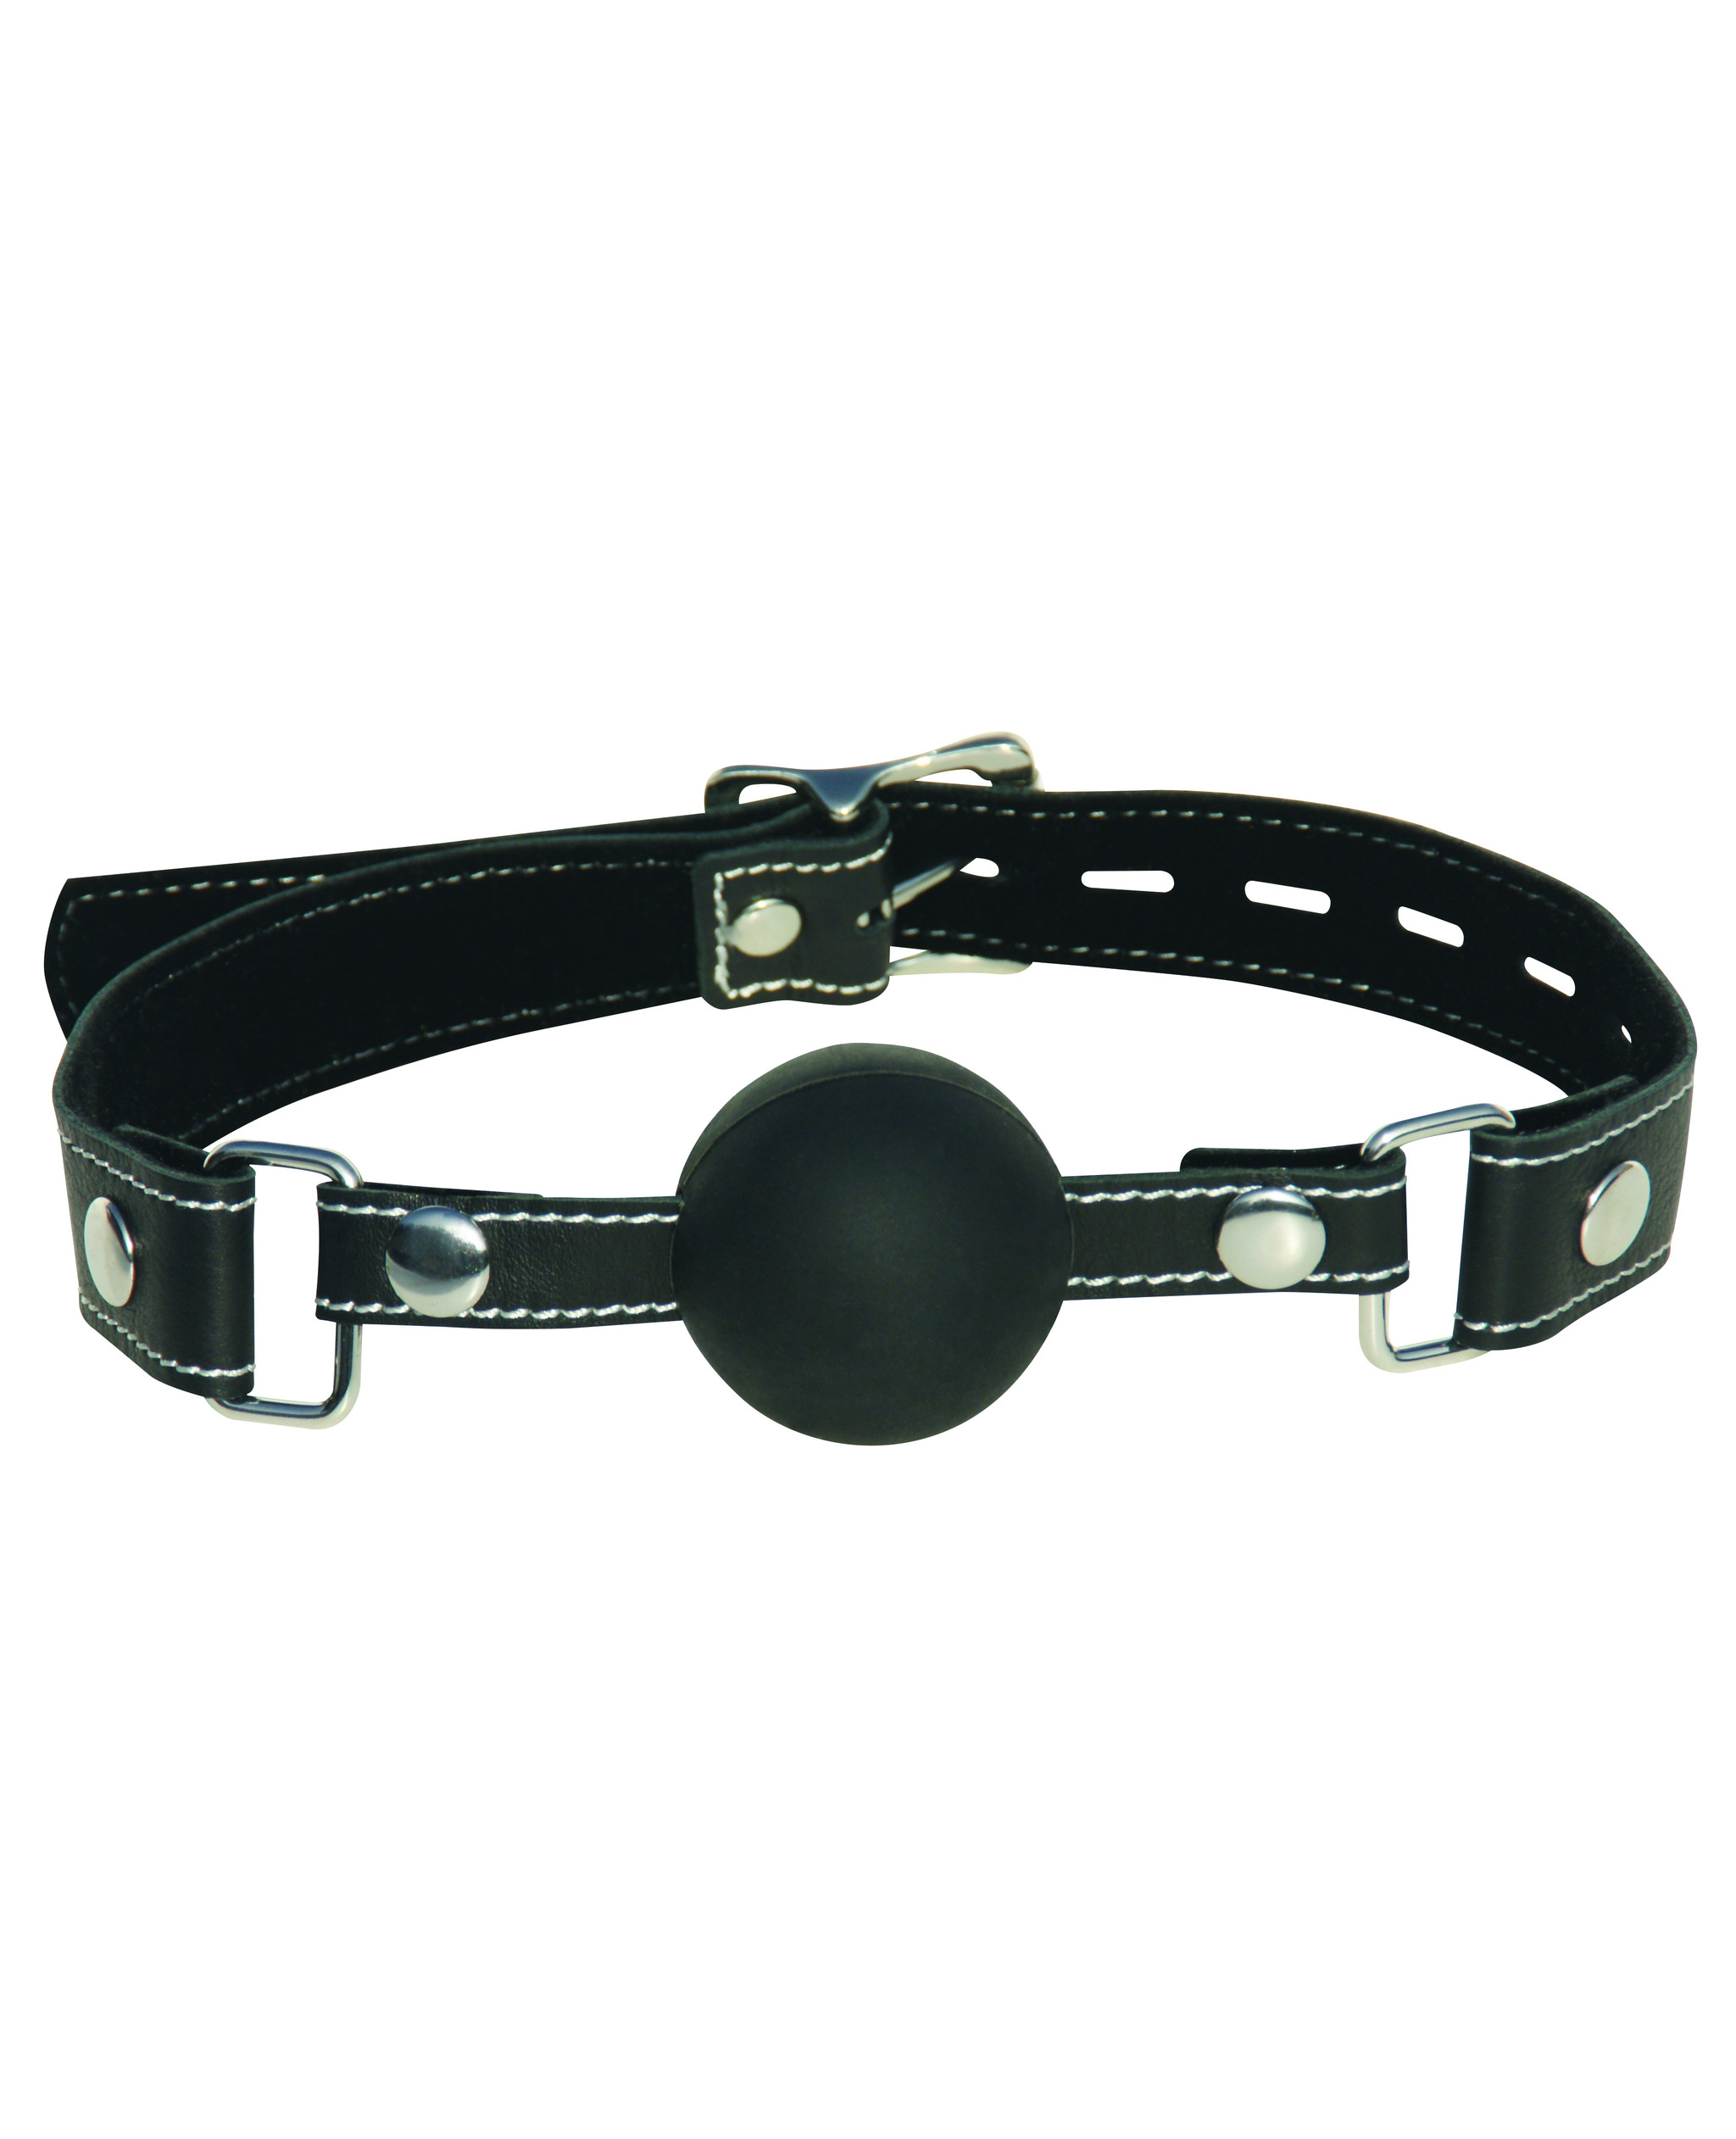 Edge+Silicone+Ball+Gag+With+Adjustable+Leather+Strap